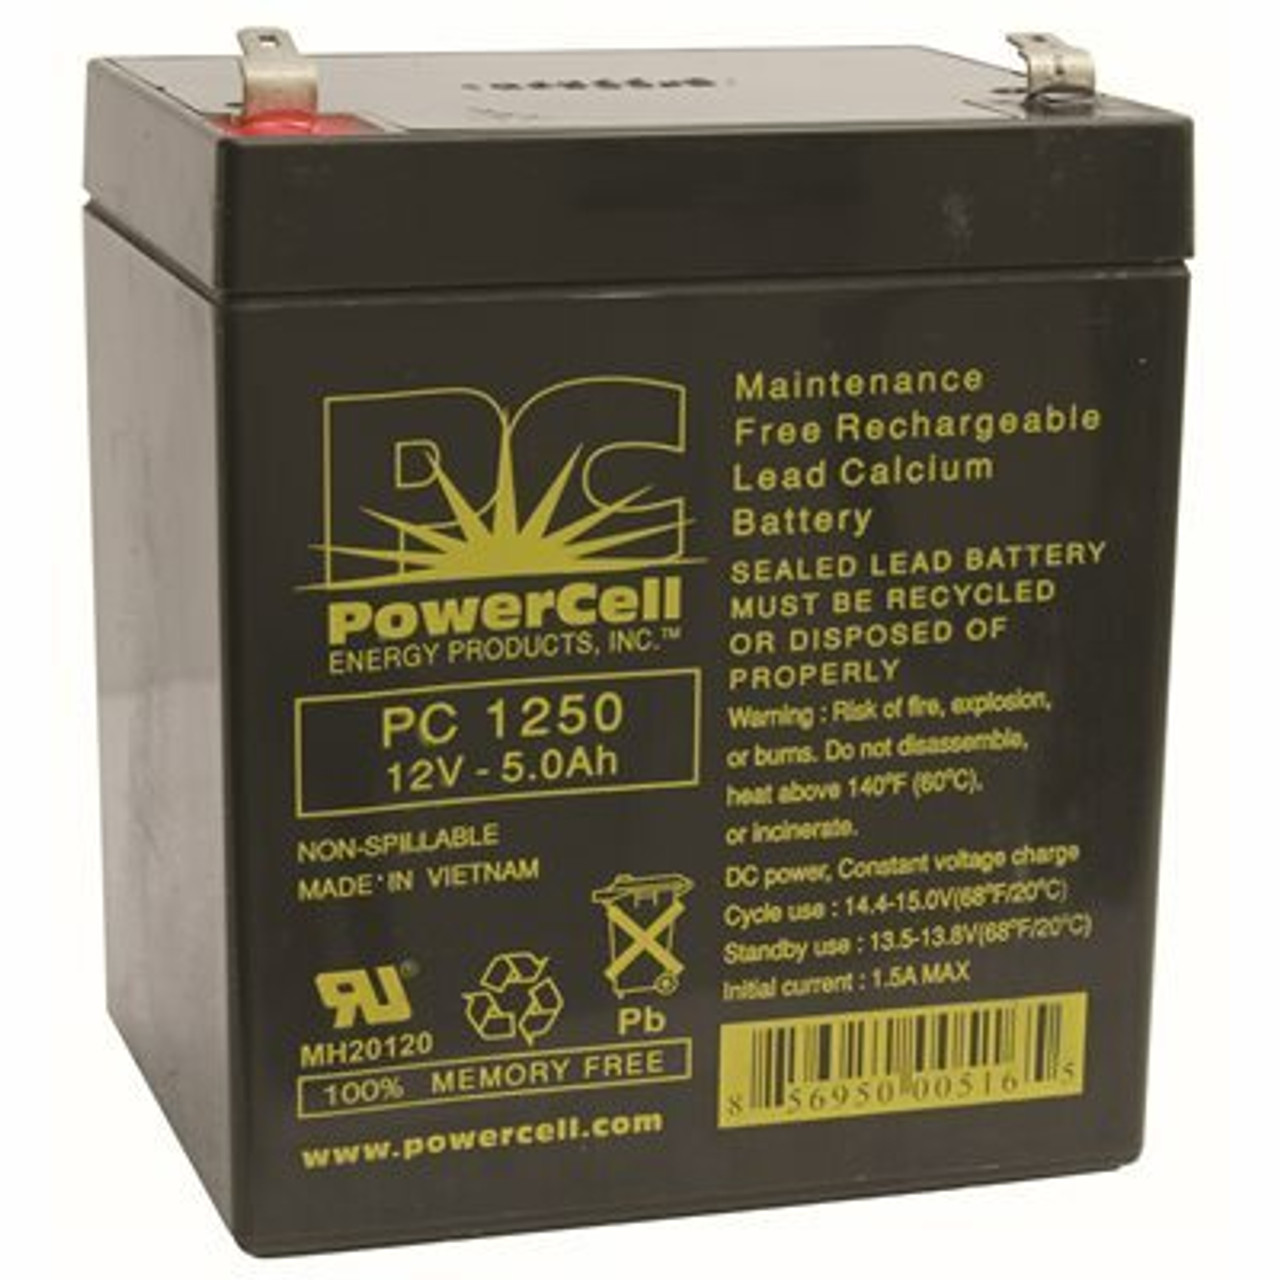 Powercell Energy Products Sealed Lead Acid Bat. 12V